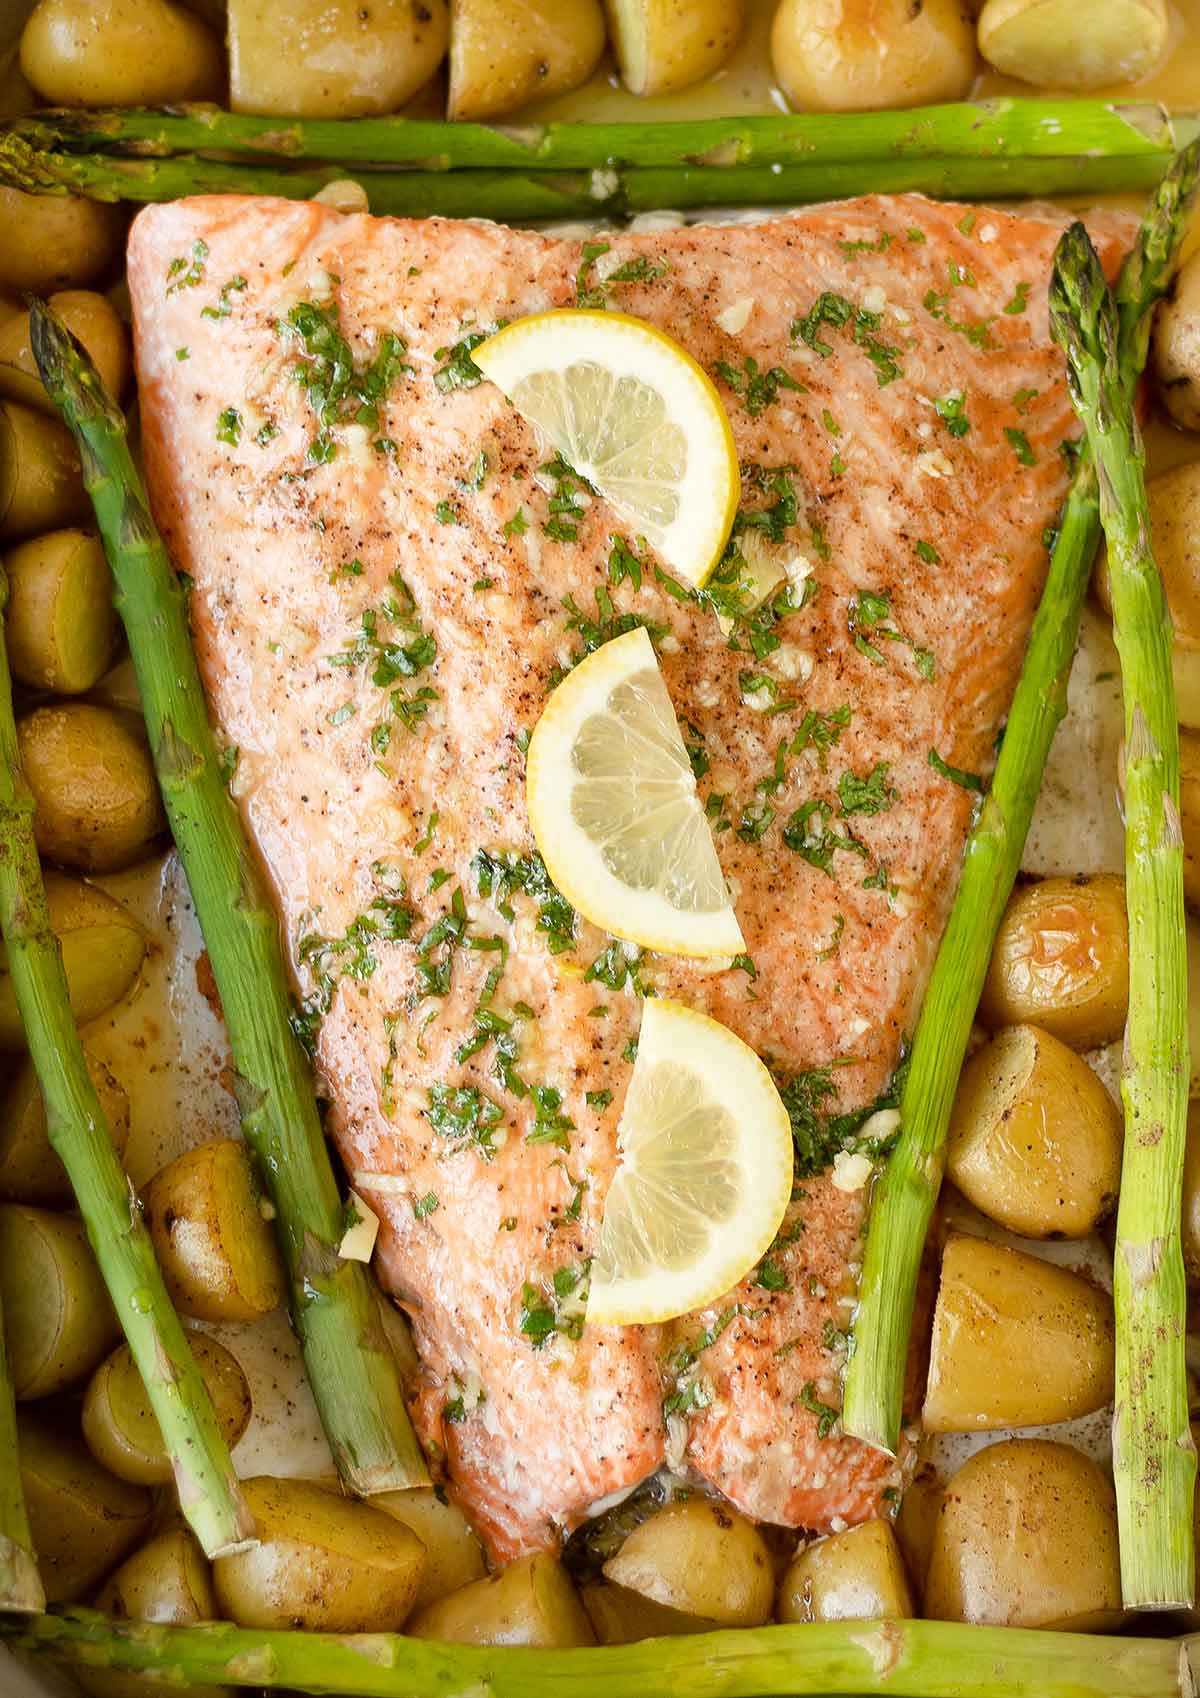 Salmon, asparagus and potatoes in a sheet pan topped with lemon slices.